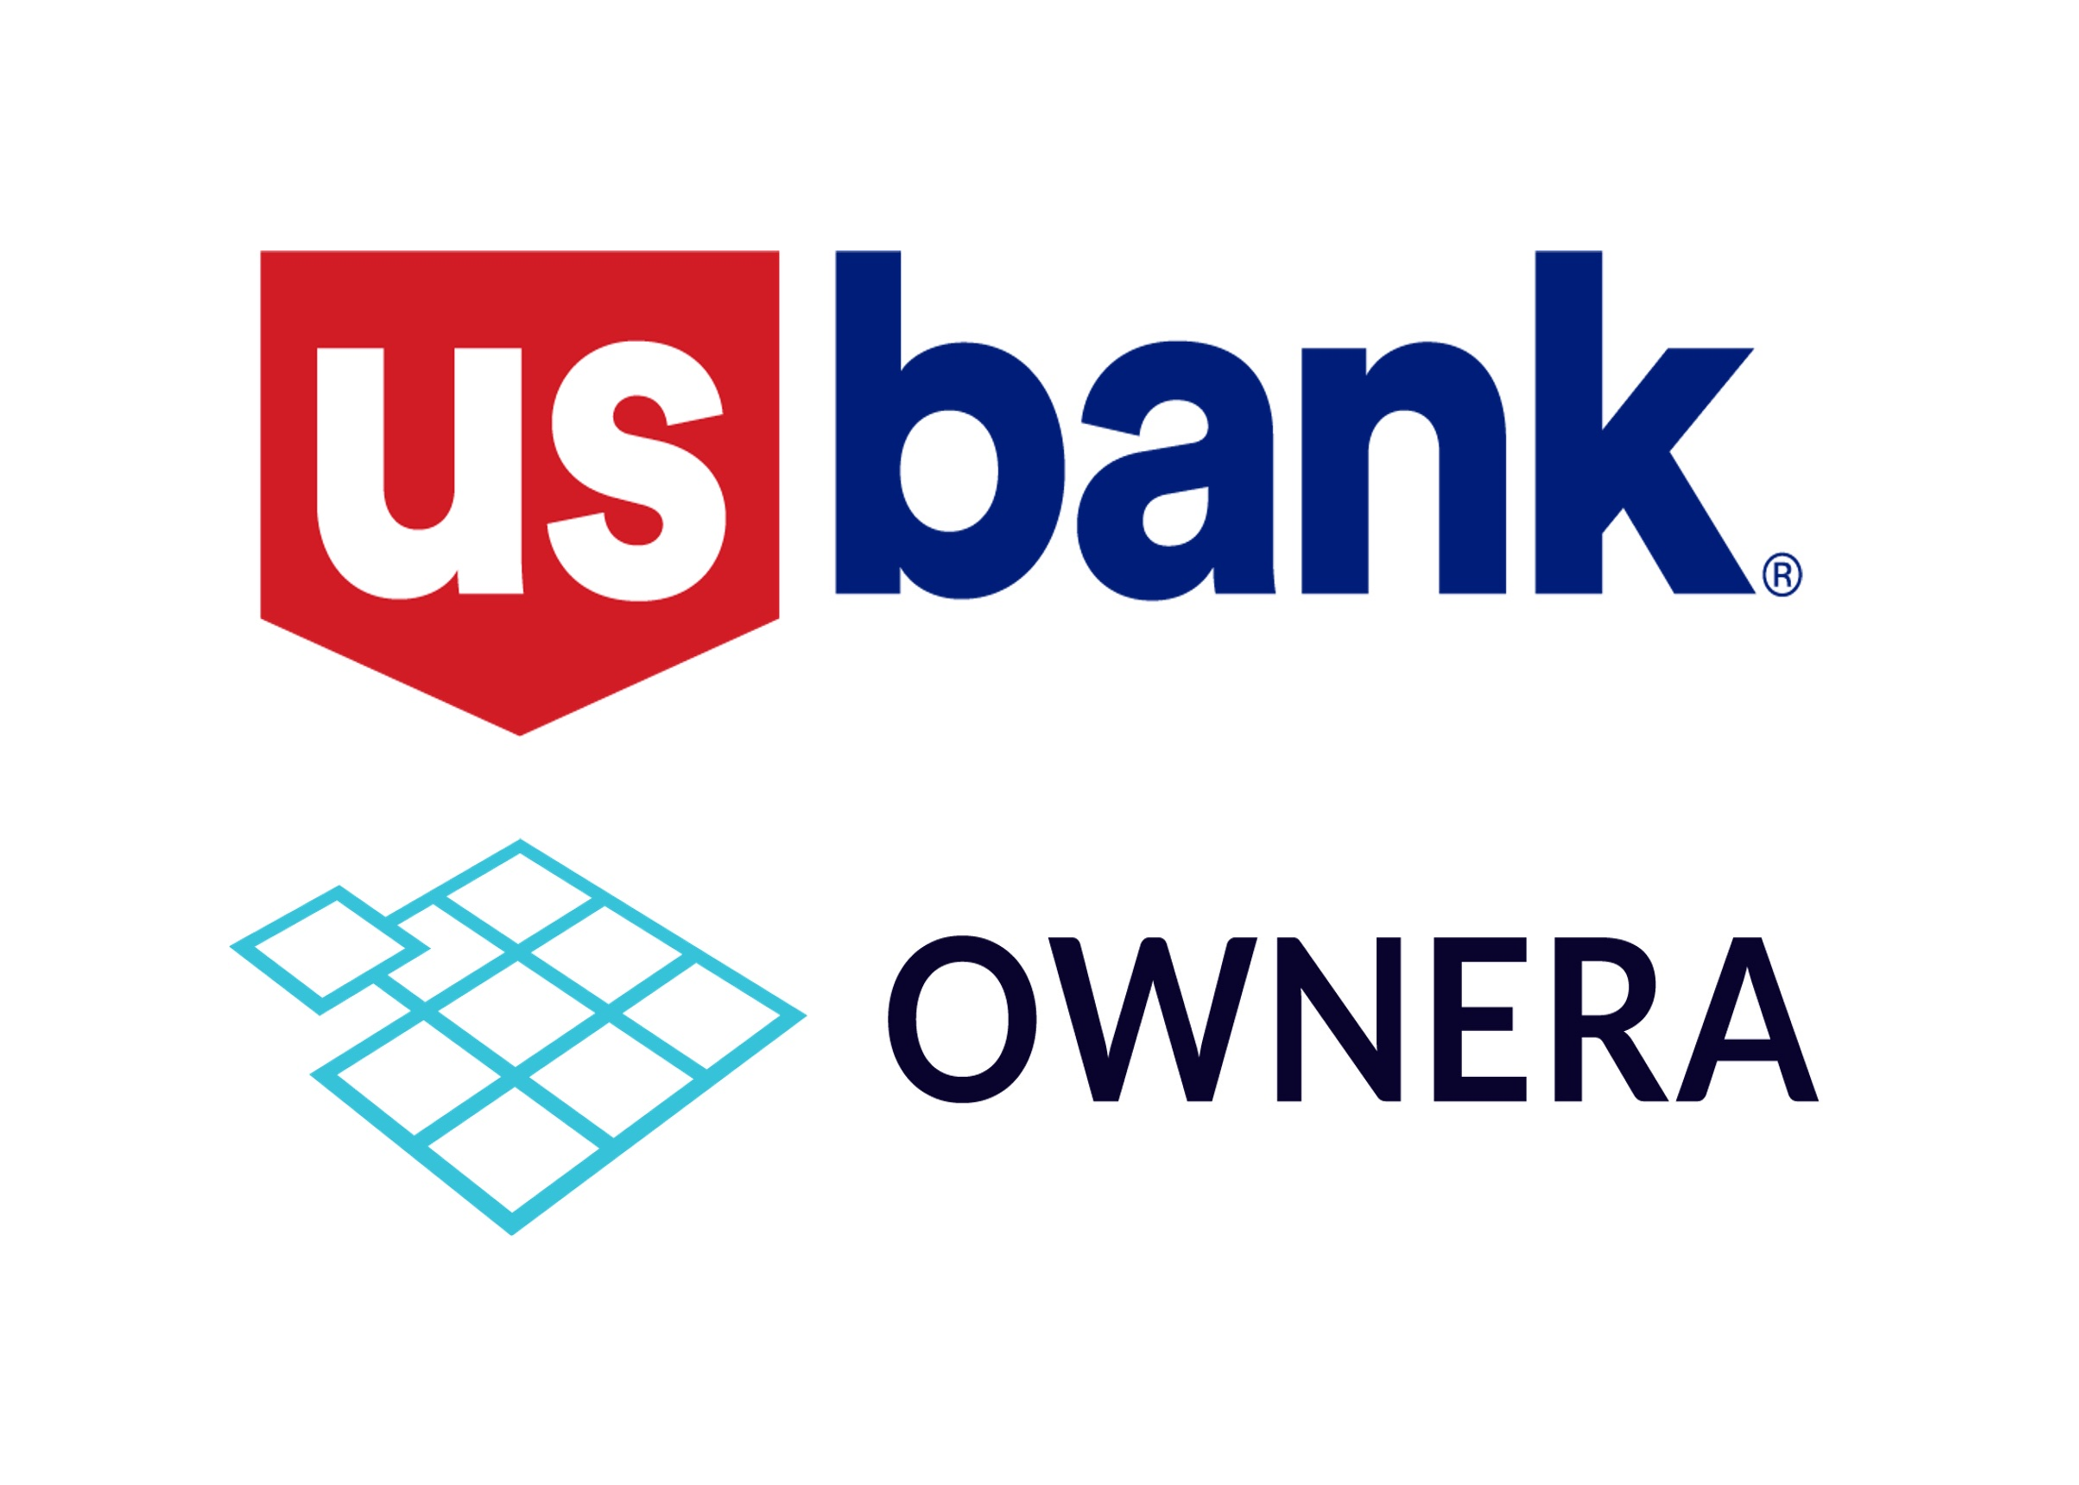 We are excited to announce U.S. Bank’s investment in Ownera’s Series A Investment Round alongside JP Morgan, LRC Group and others